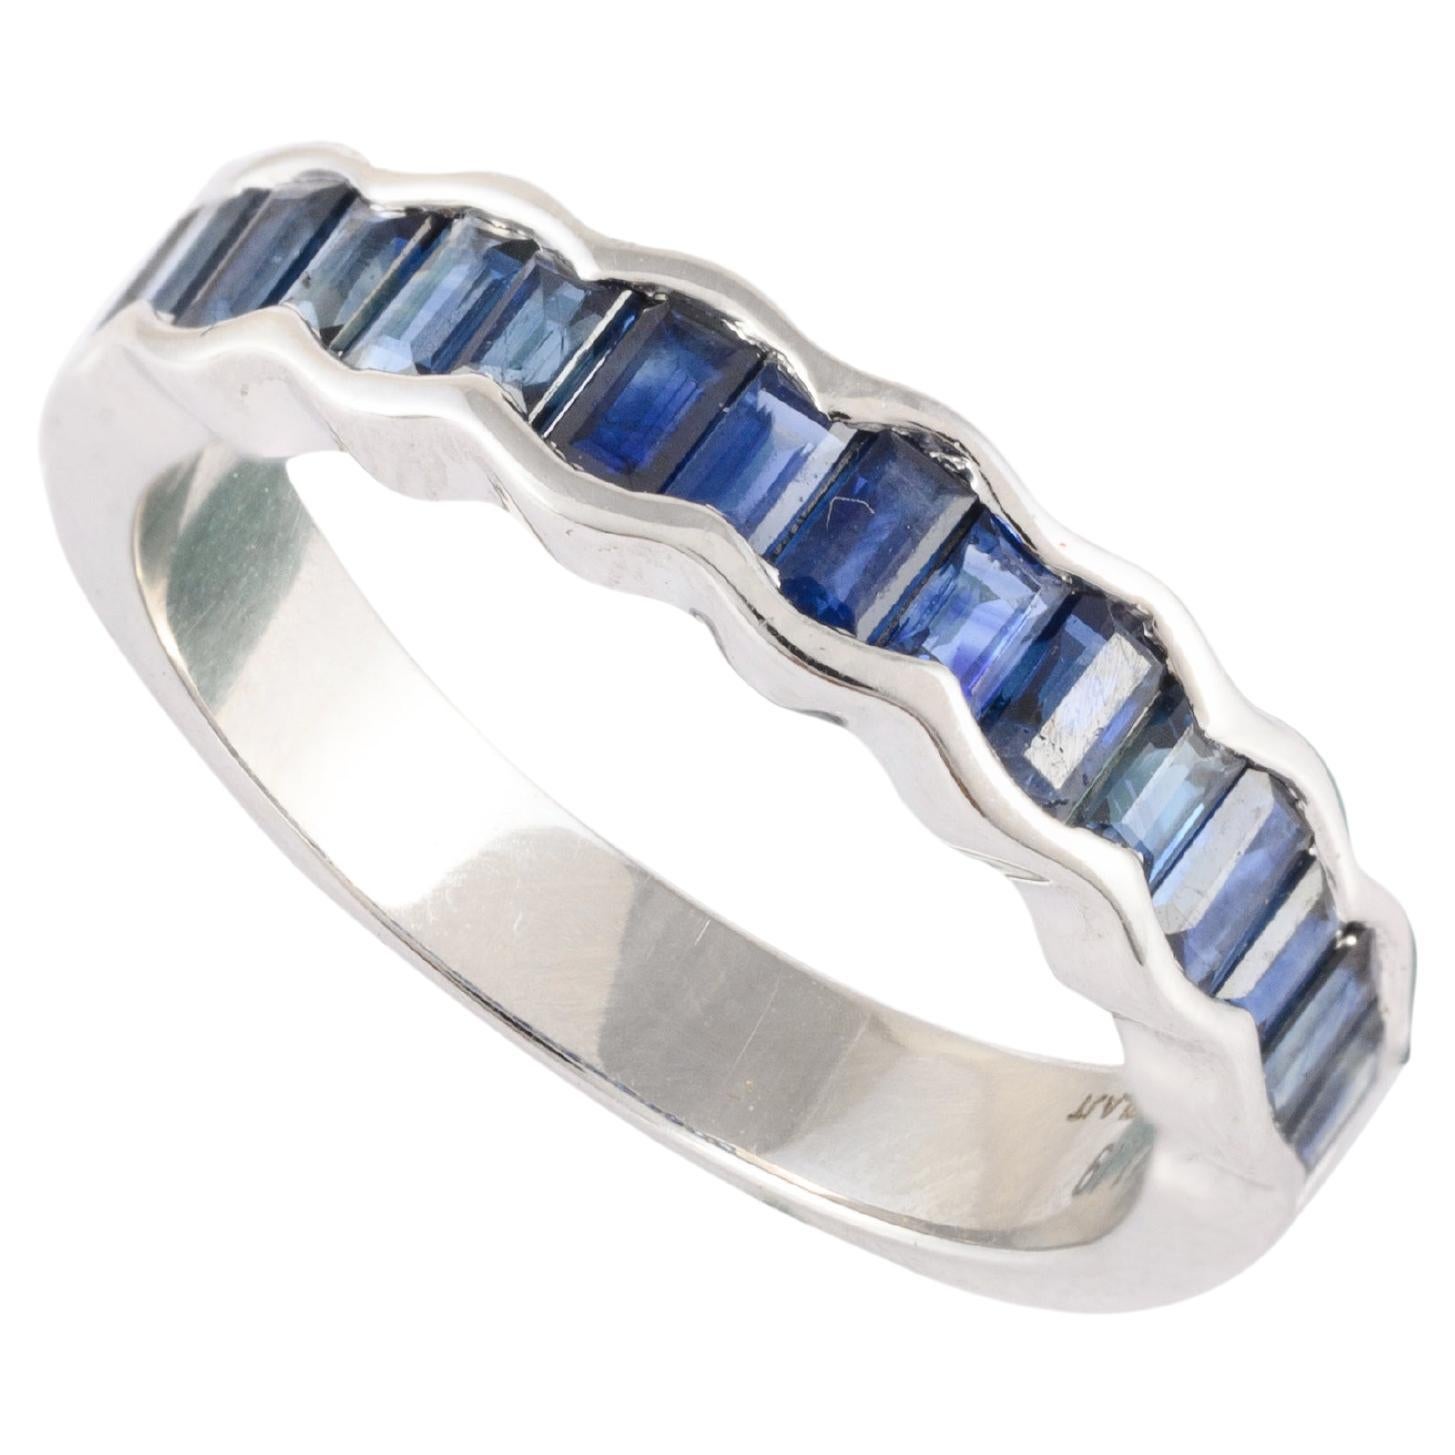 Elegant Stackable Blue Sapphire Gemstone Band Ring in 18k Solid White Gold